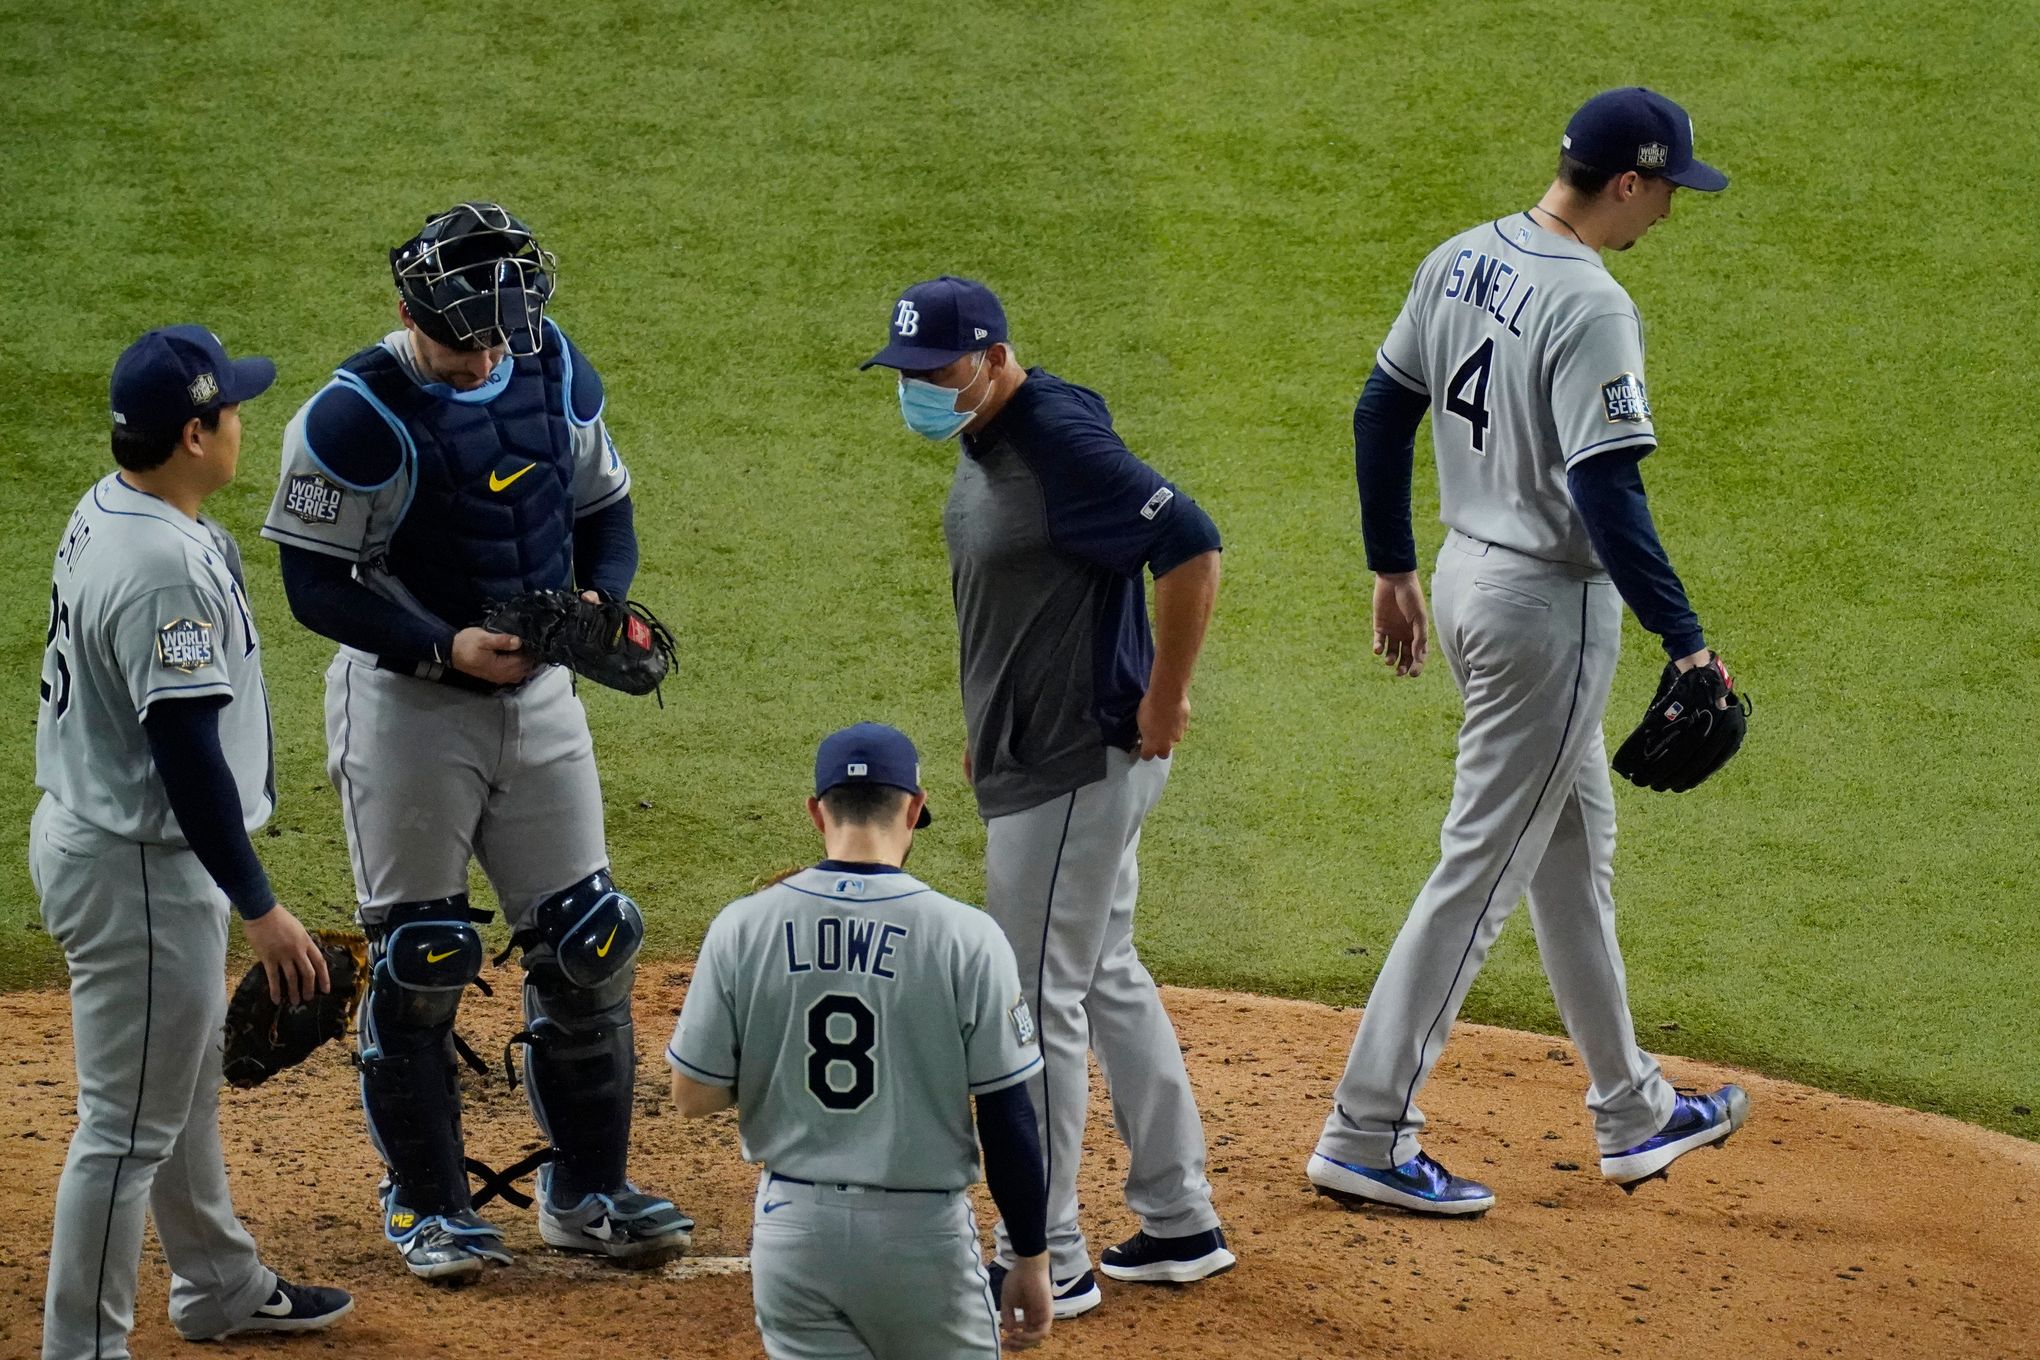 World Series 2020 -- Don't count out the Rays; after Dodgers